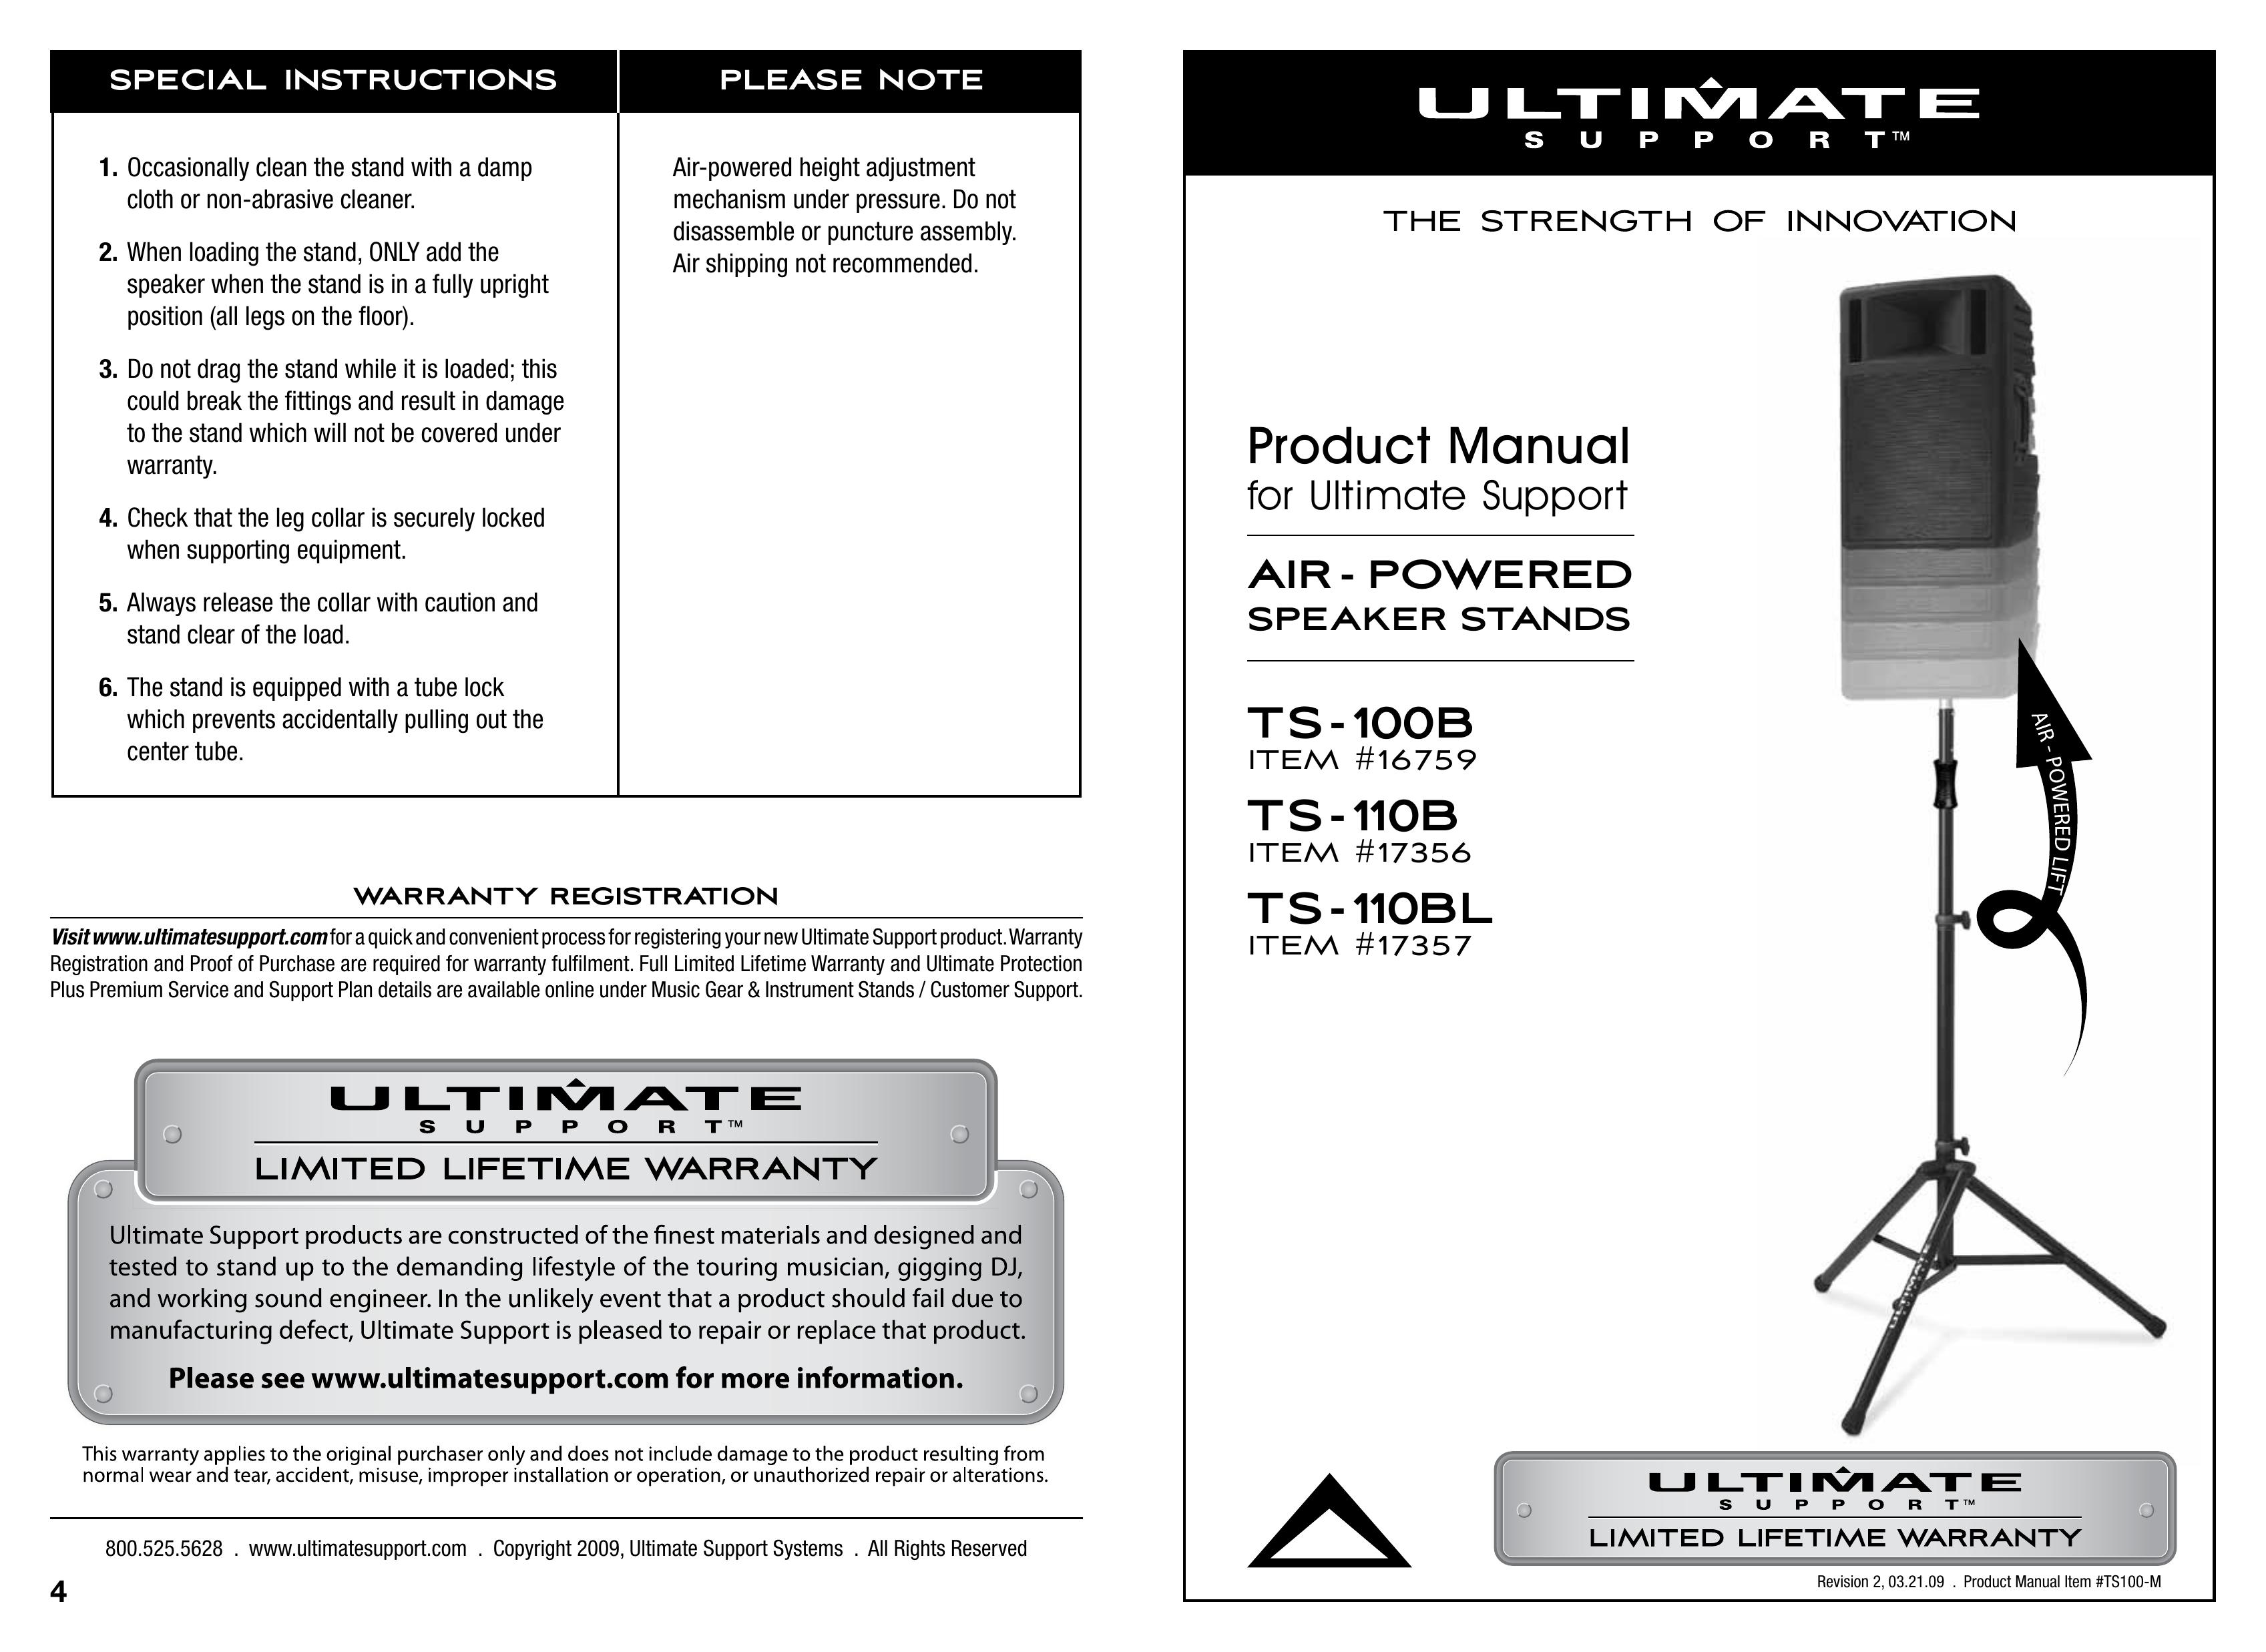 Ultimate Support Systems TS-110BL Water Dispenser User Manual